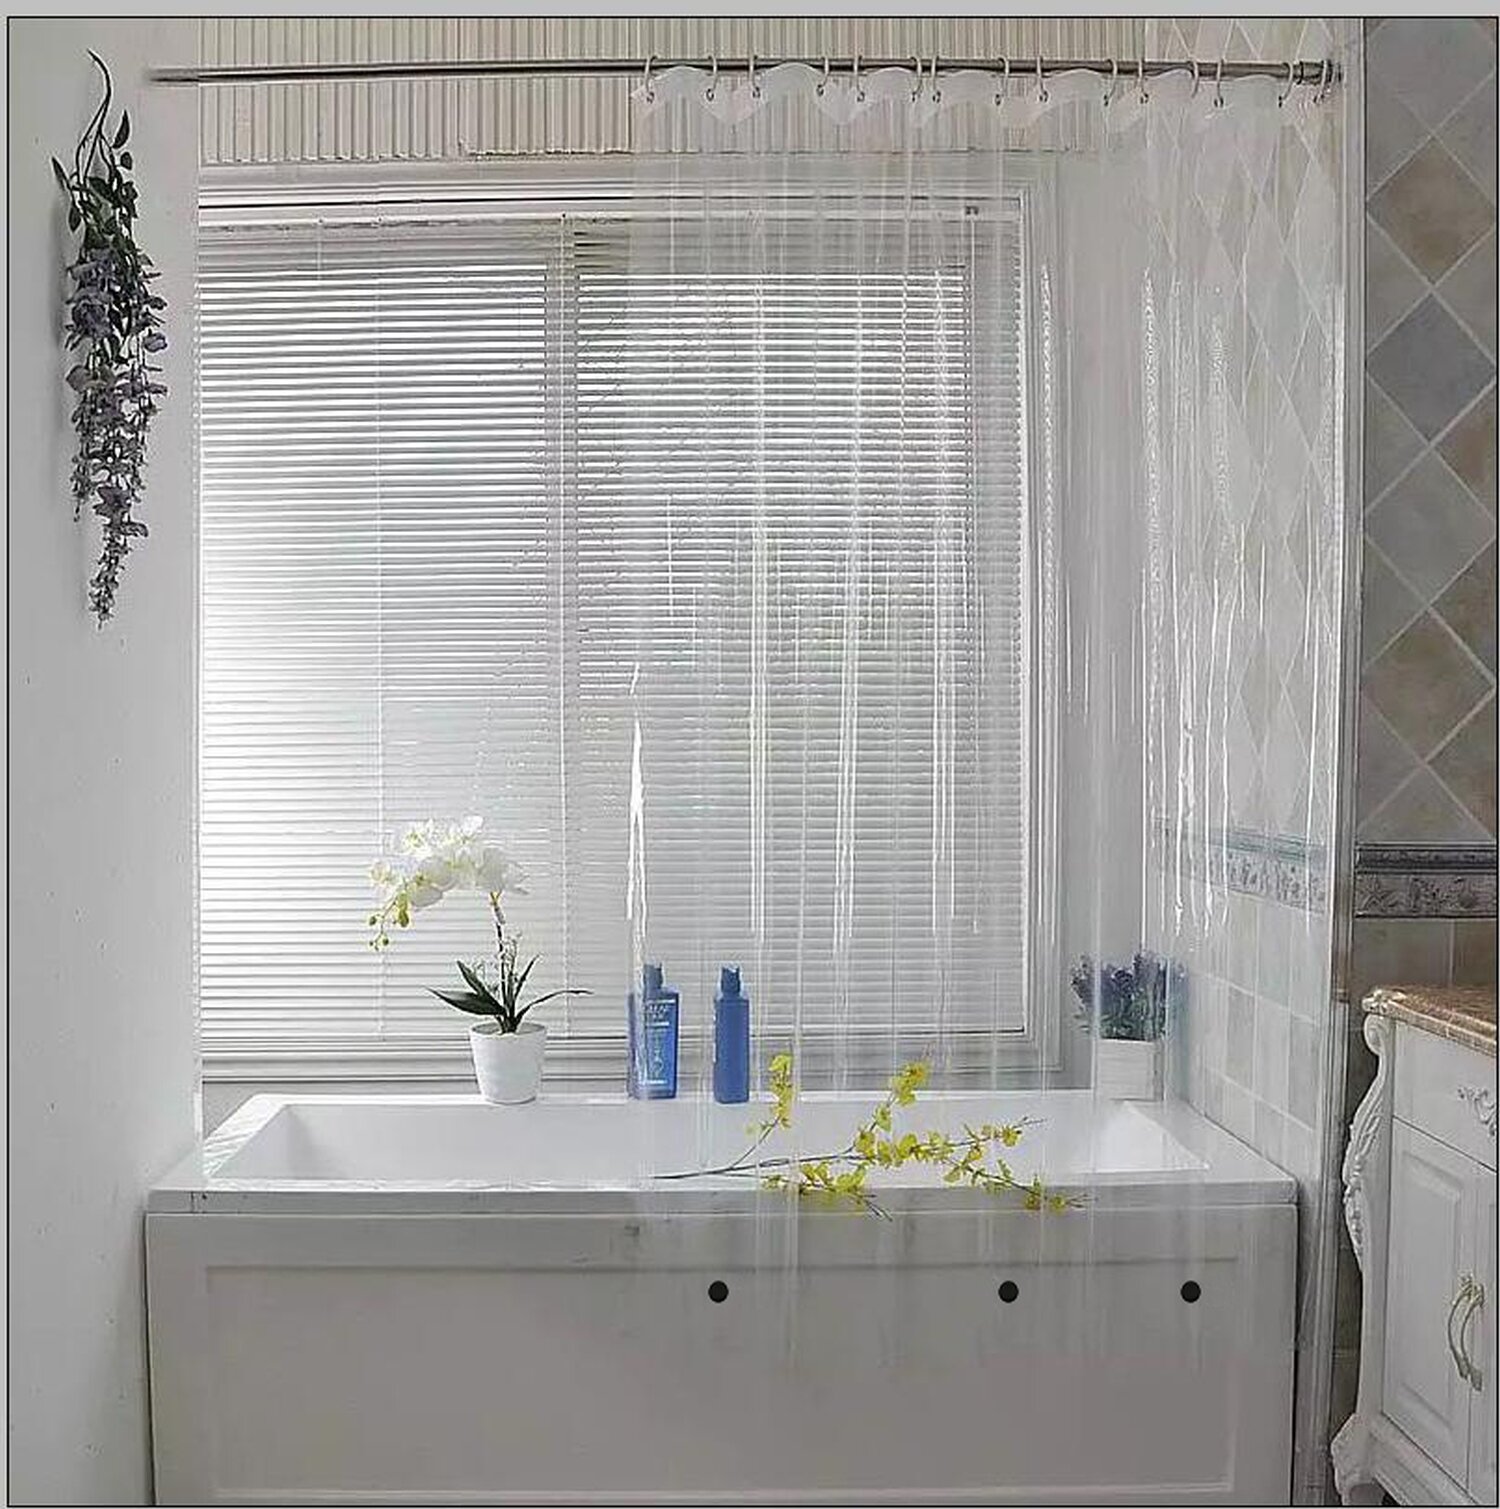 72 x 78 inches UFRIDAY White Lattice Polyester Shower Curtain with Mesh Window Waterproof Bathroom Curtain Washable Bath Curtain with Metal Grommets